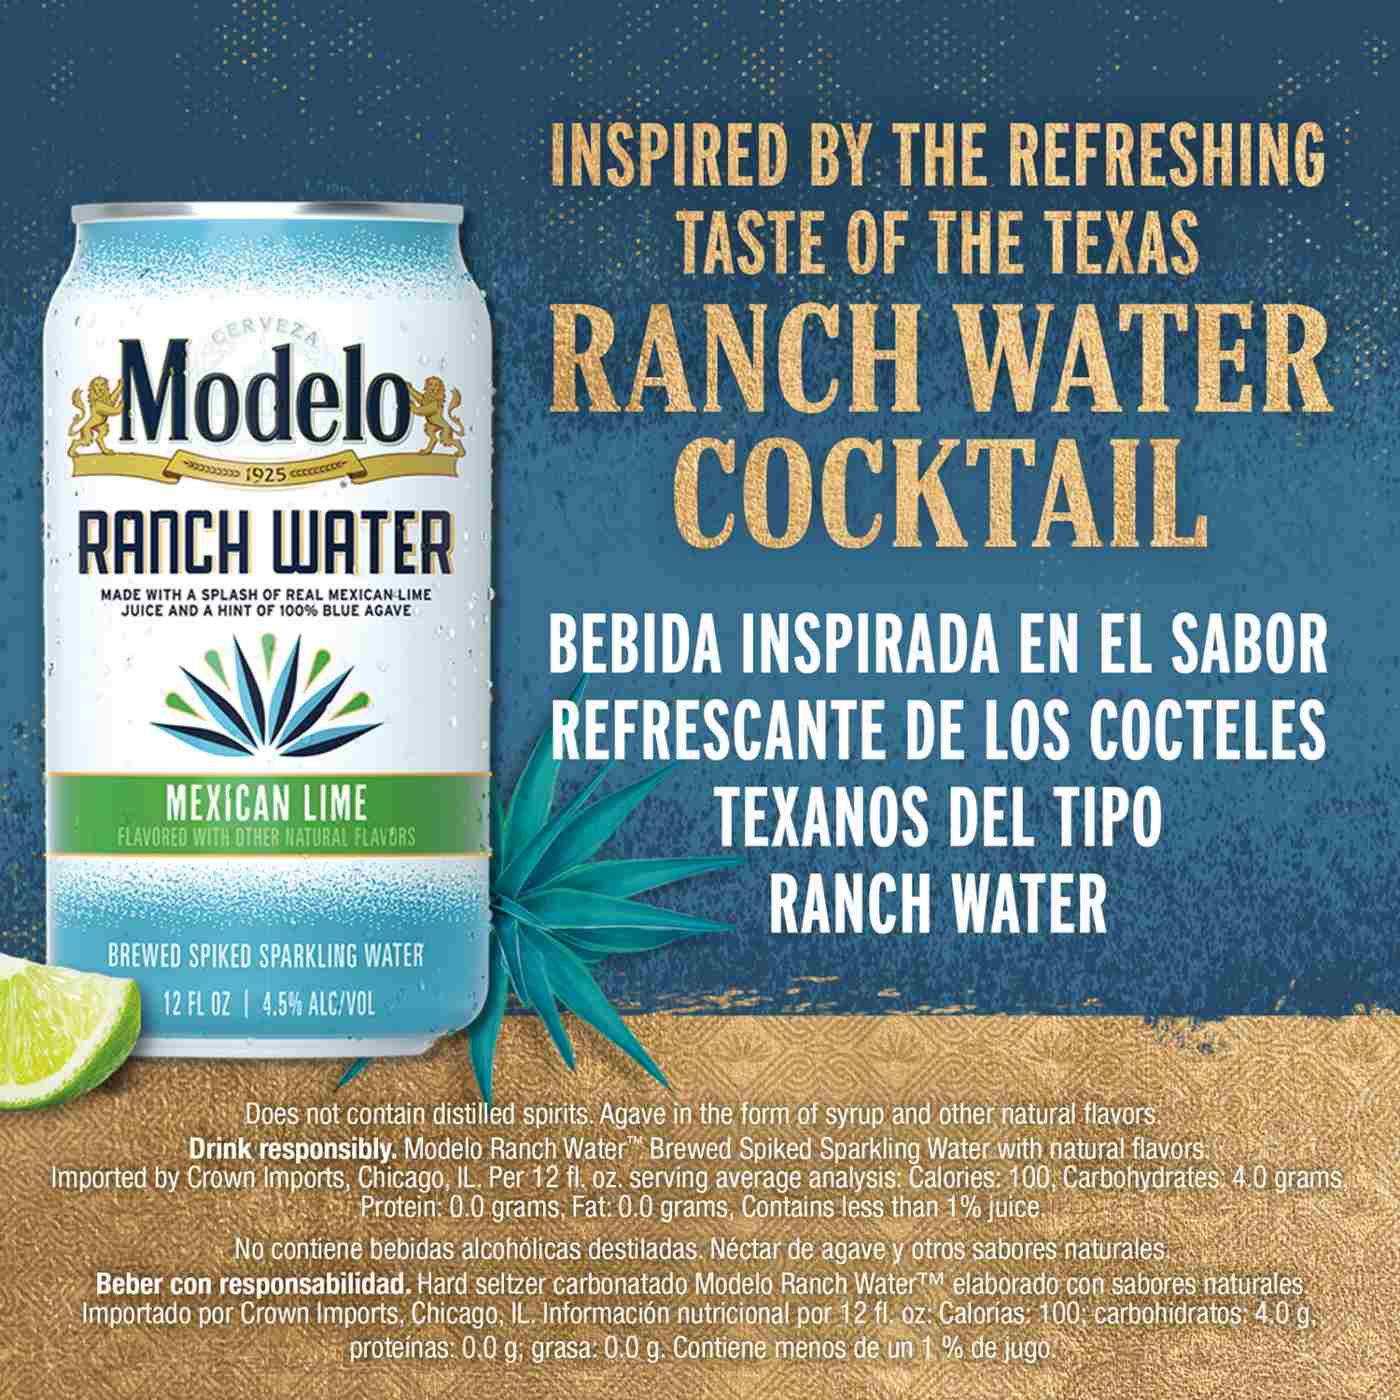 Modelo Ranch Water Spiked Sparkling Water 12 oz Cans, 6 pk; image 5 of 8